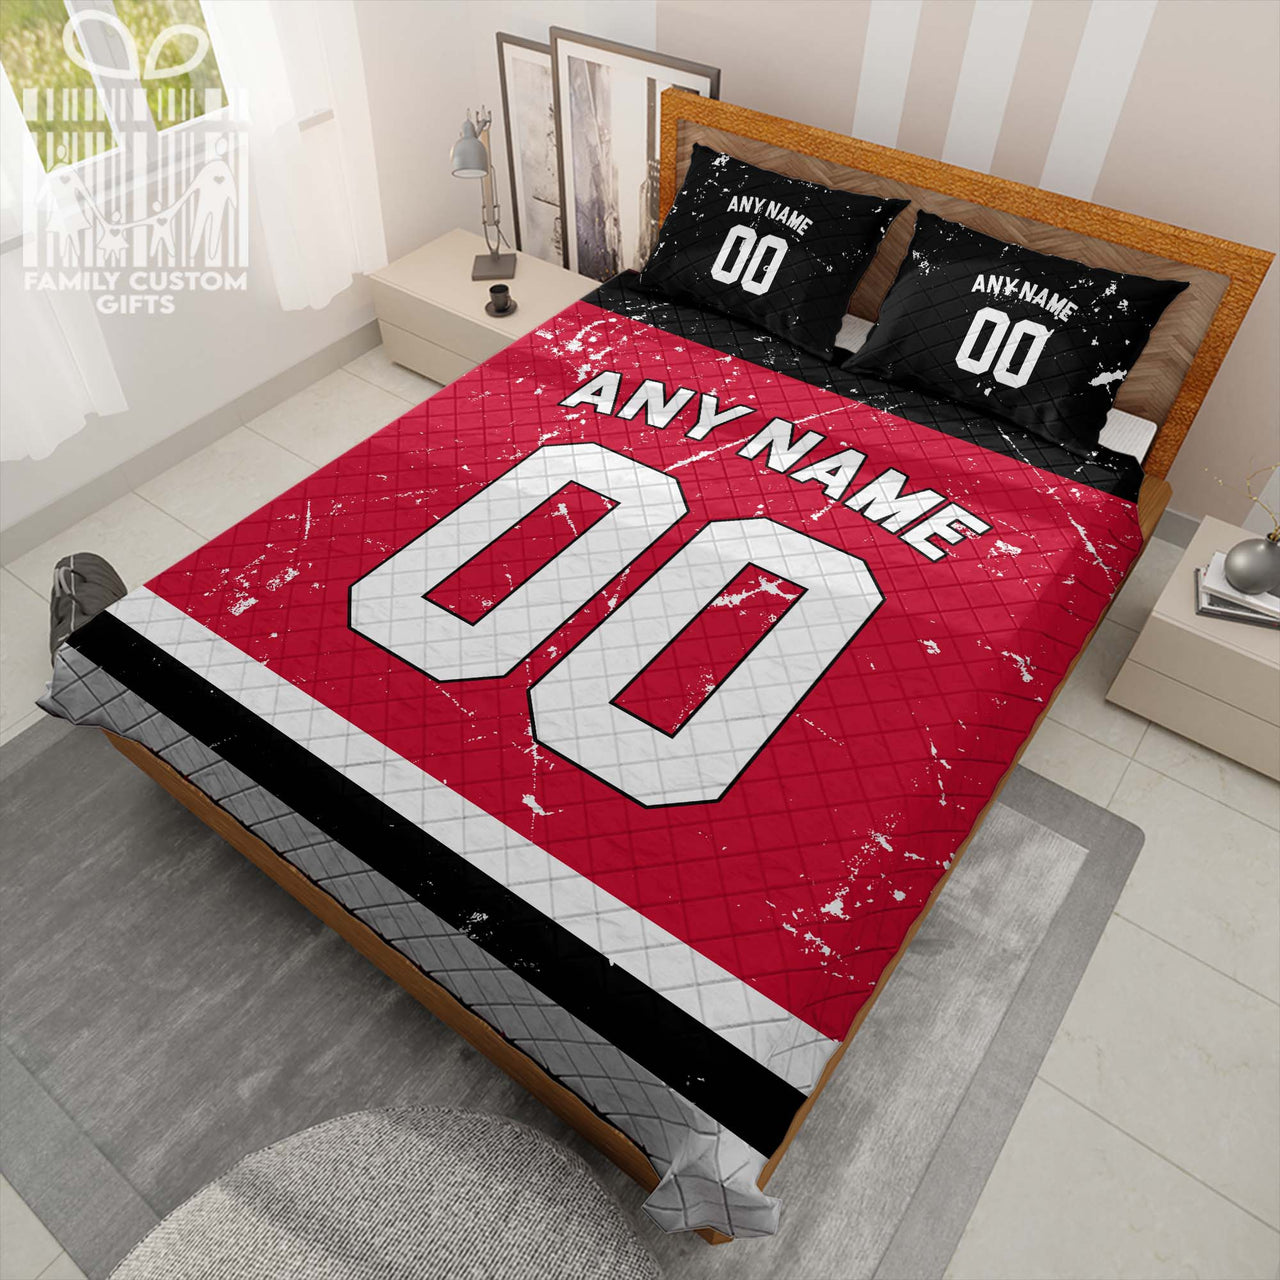 Custom Quilt Sets New Jersey Personalized Ice hockey Premium Quilt Bedding for Men Women